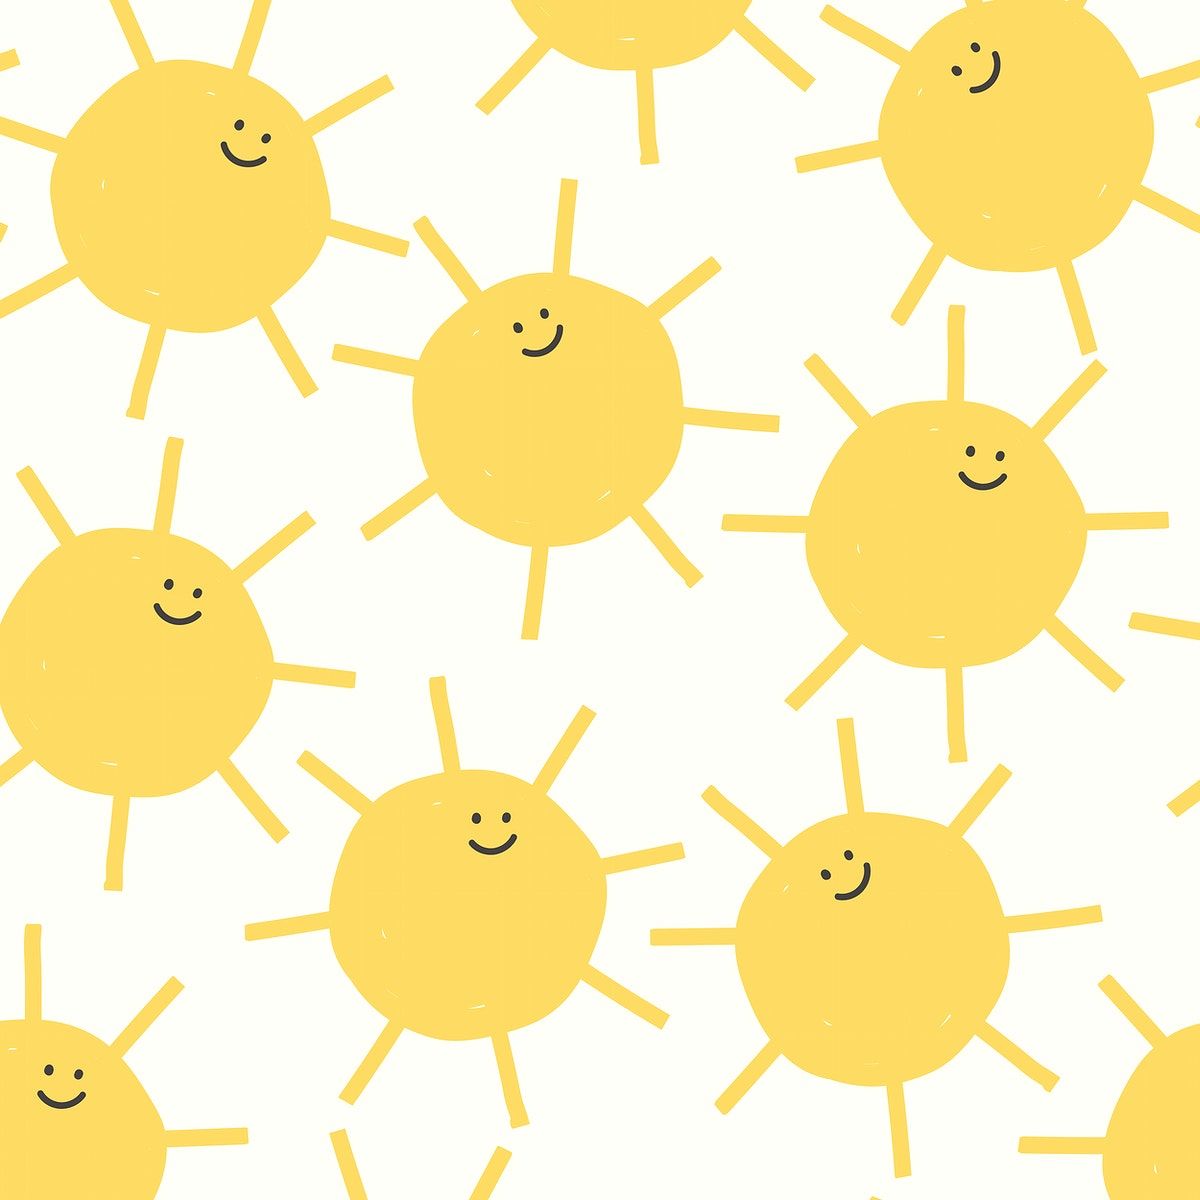 Download premium vector of Sun seamless pattern background vector weather doodle for kids by Nunny about patterns, cute patterns, summer, smile, and seamless patterns 3003639